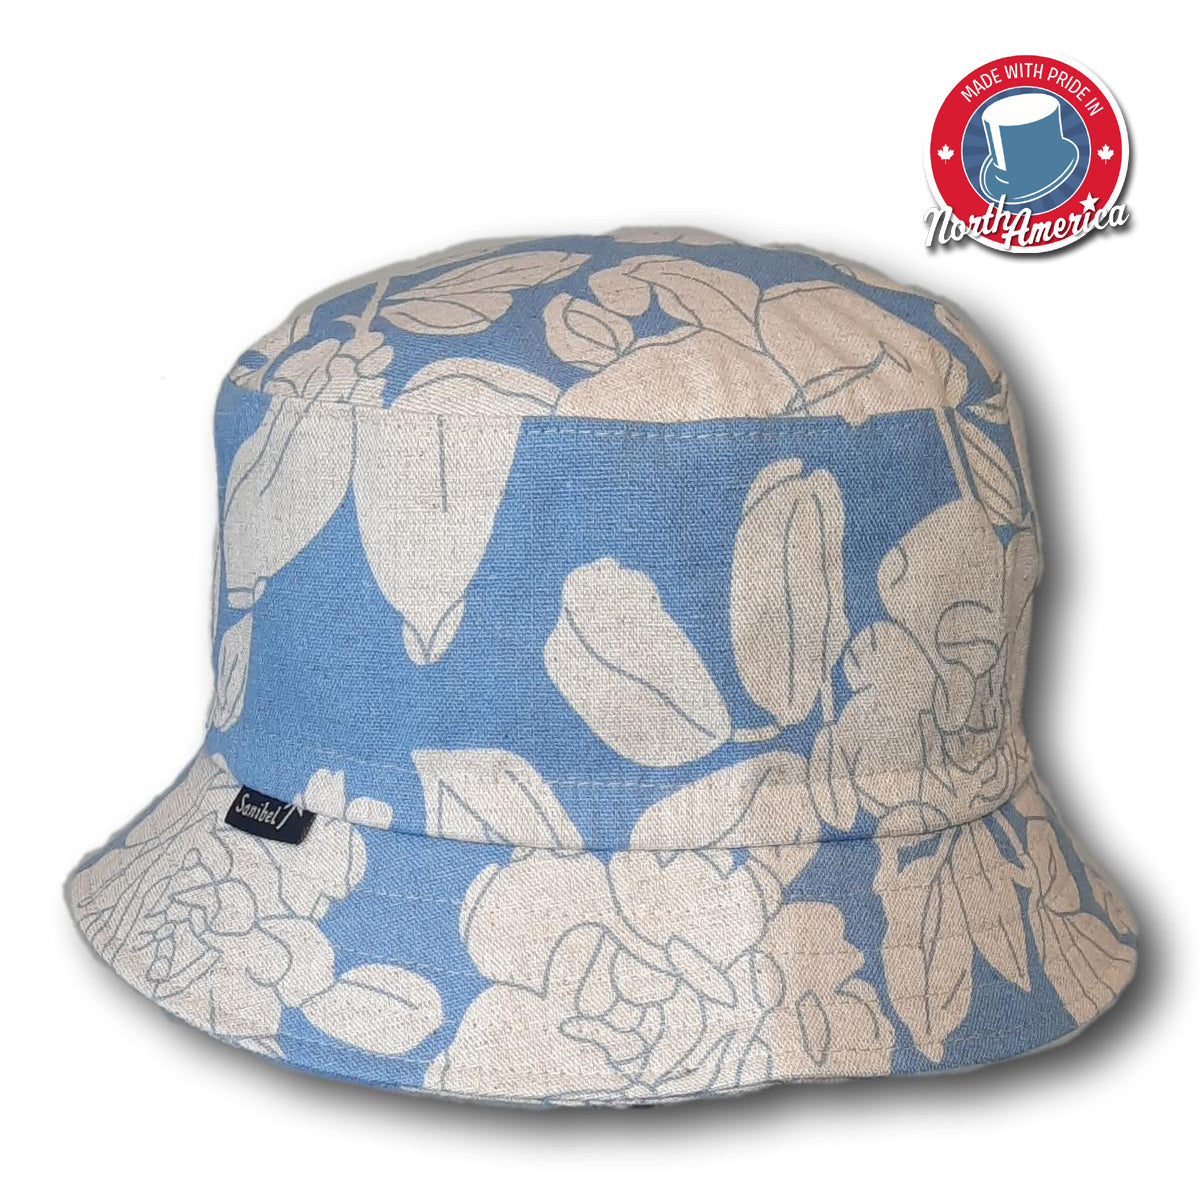 Two-Tone Rose Printed Bucket Hat